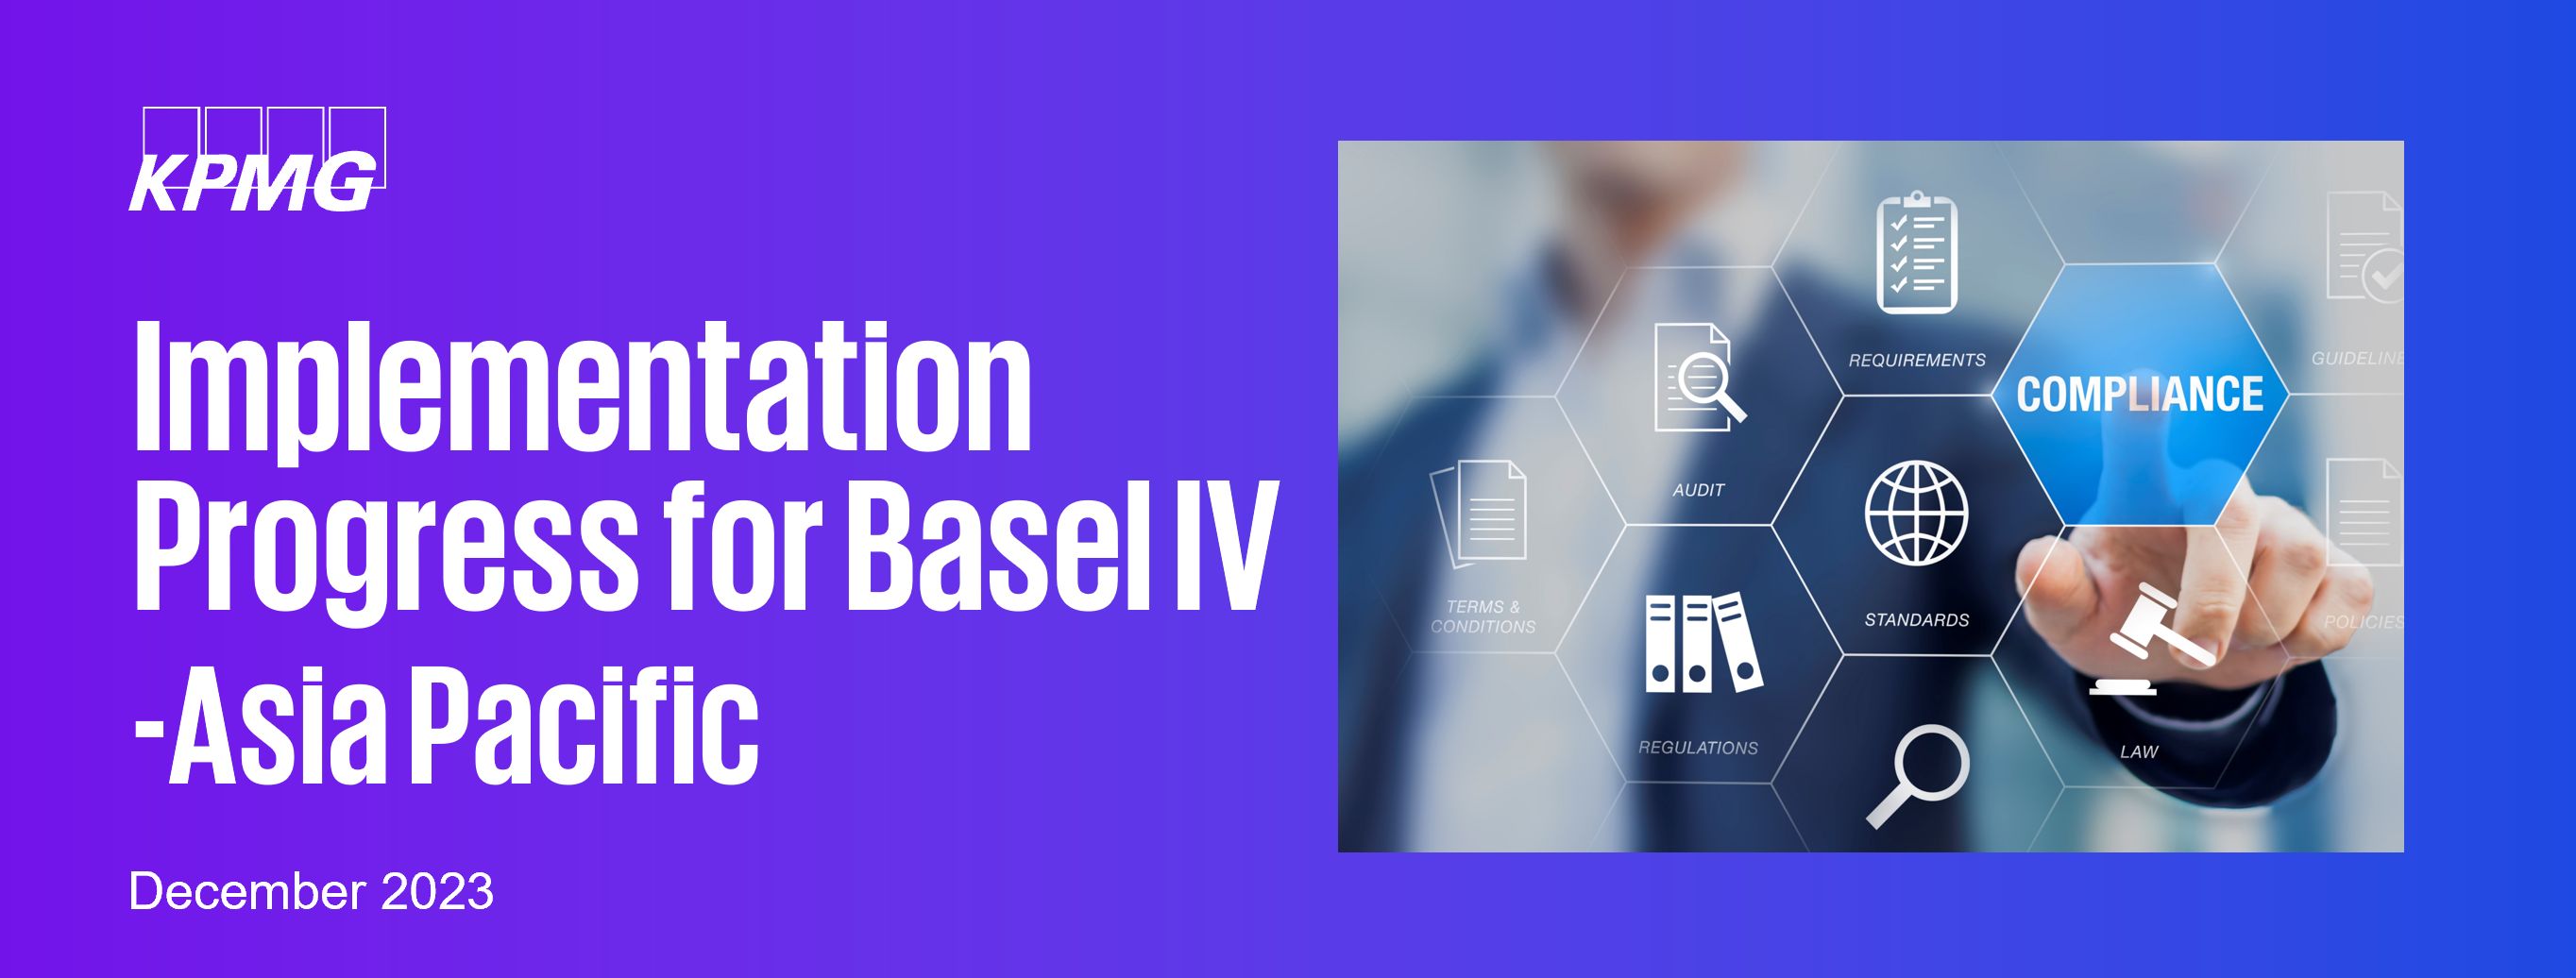 Implementation Progress for Basel IV - Asia Pacific